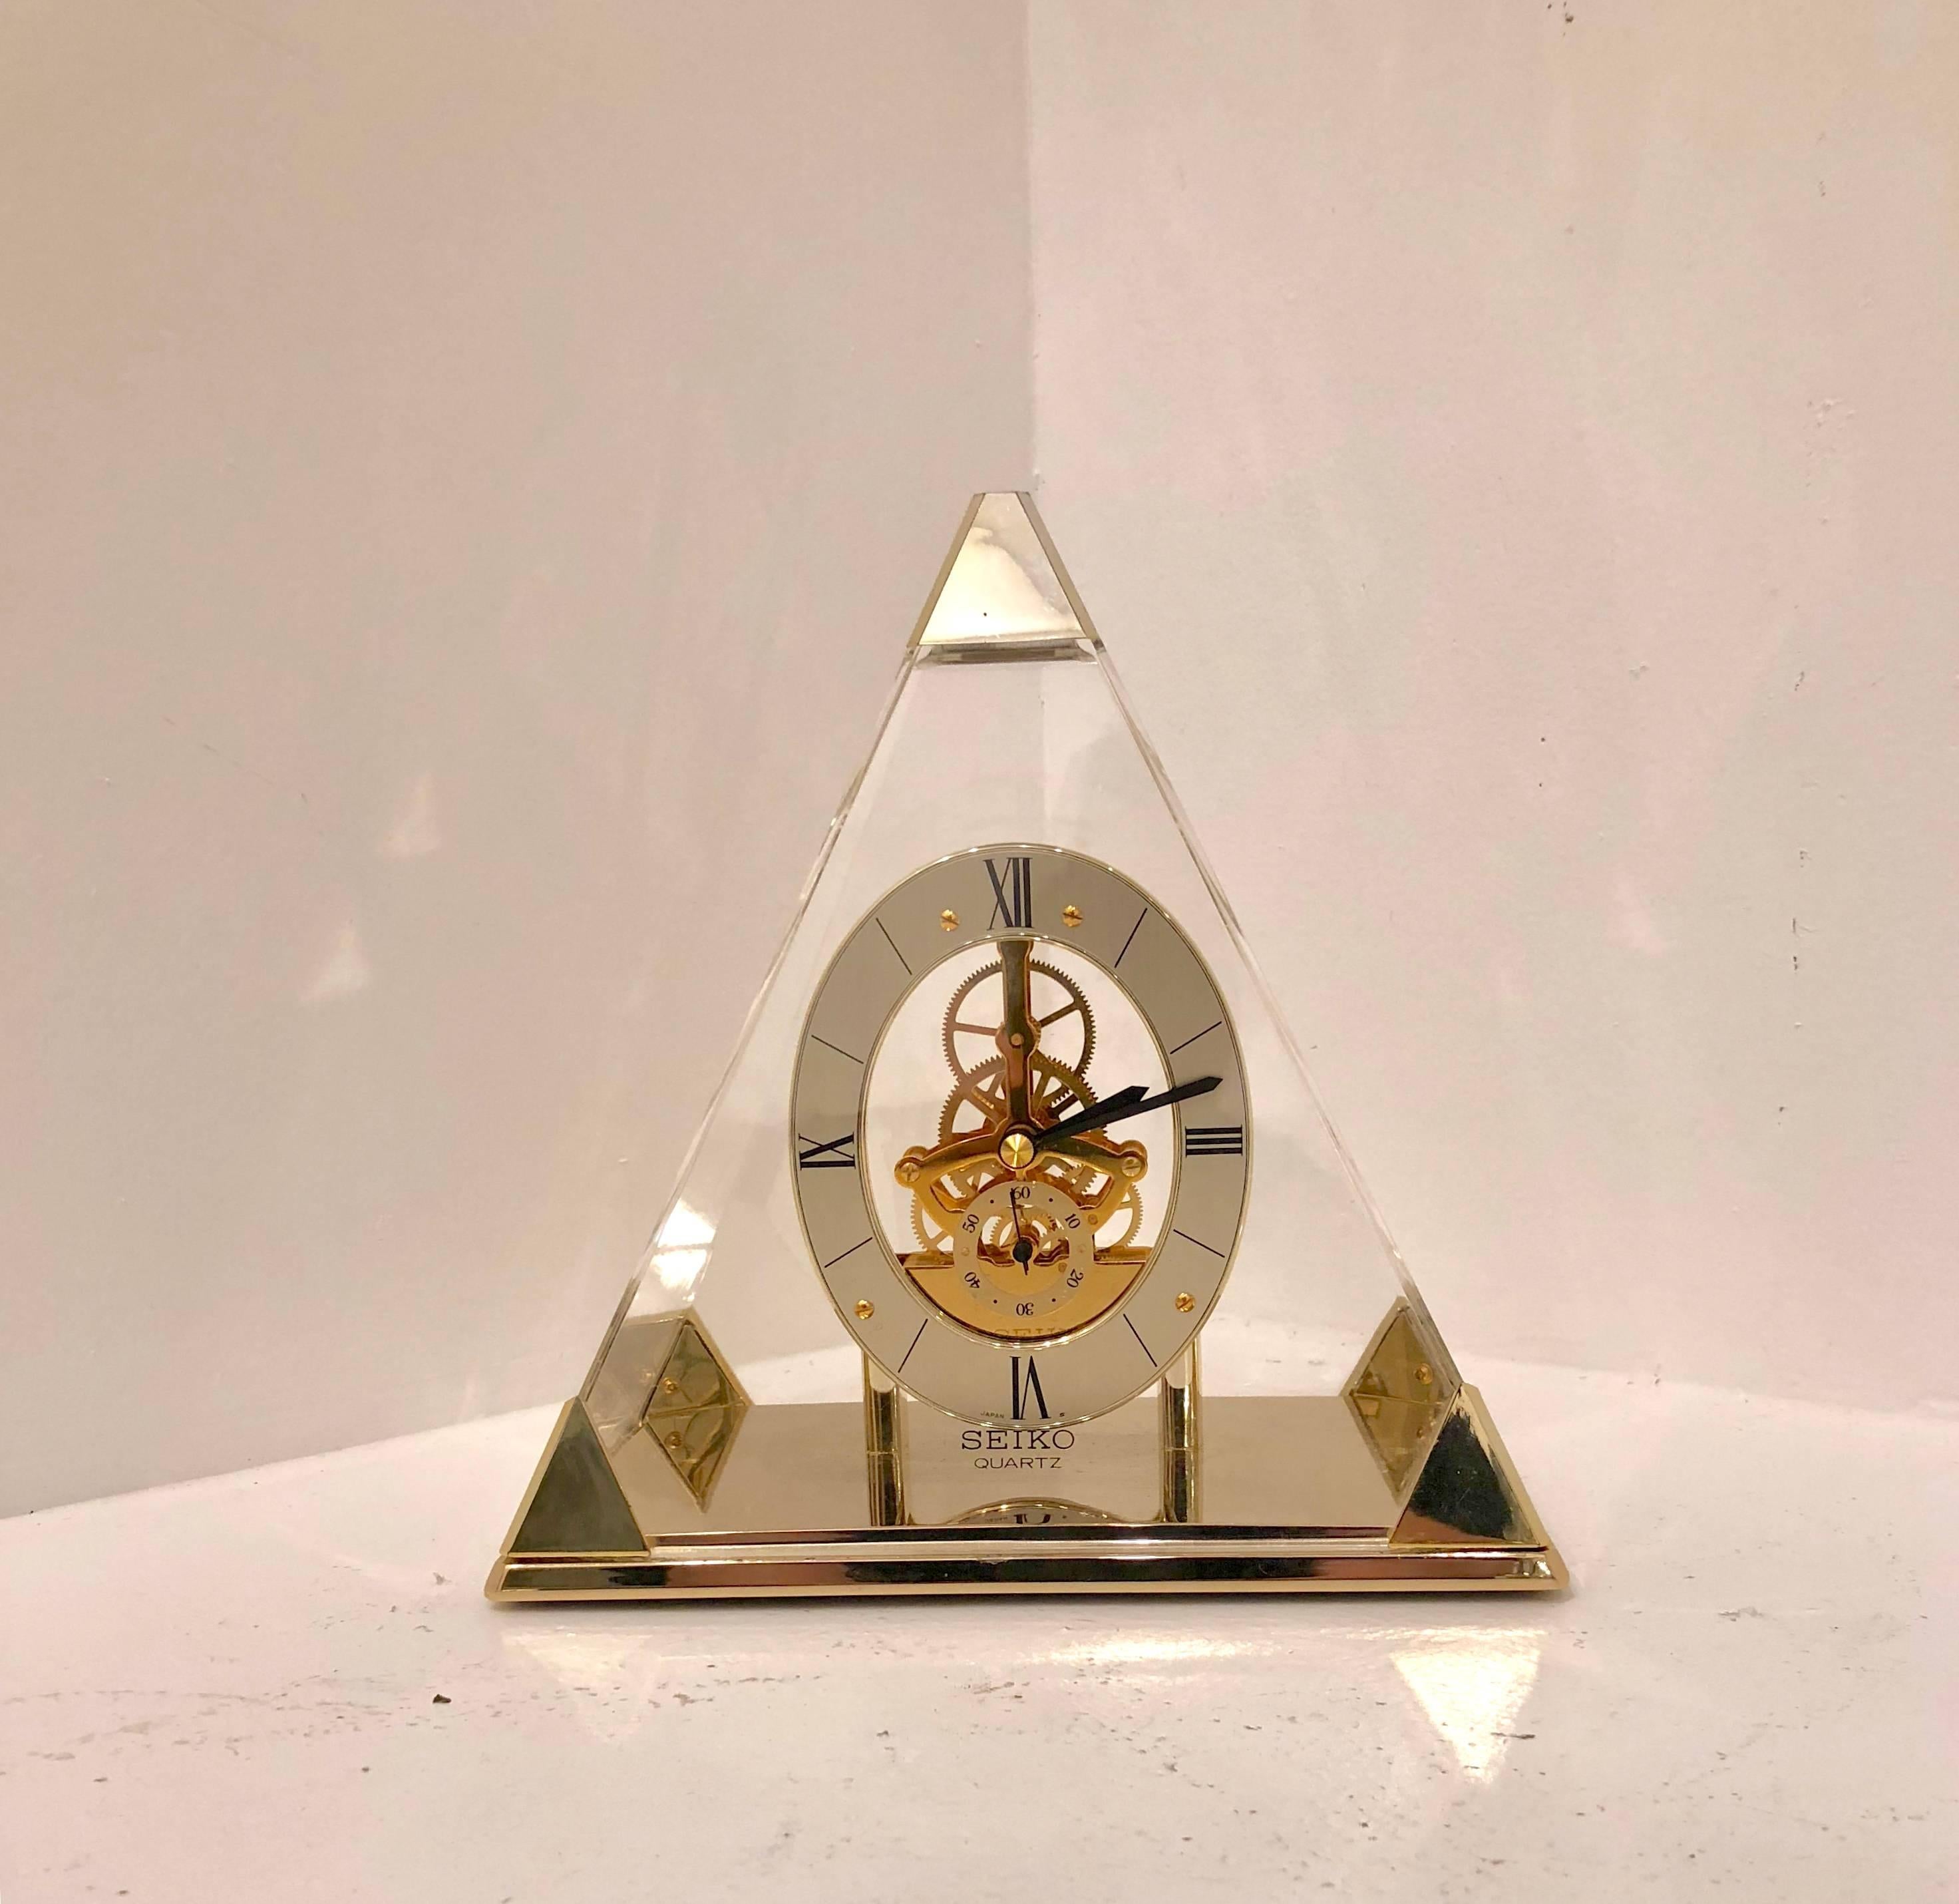 Great design pyramid shape mantel clock, made by the Japanese manufacturer Seiko in great cosmetic and functioning condition, quartz battery operated in Memphis style design with brass accents and Roman numeral numbers.